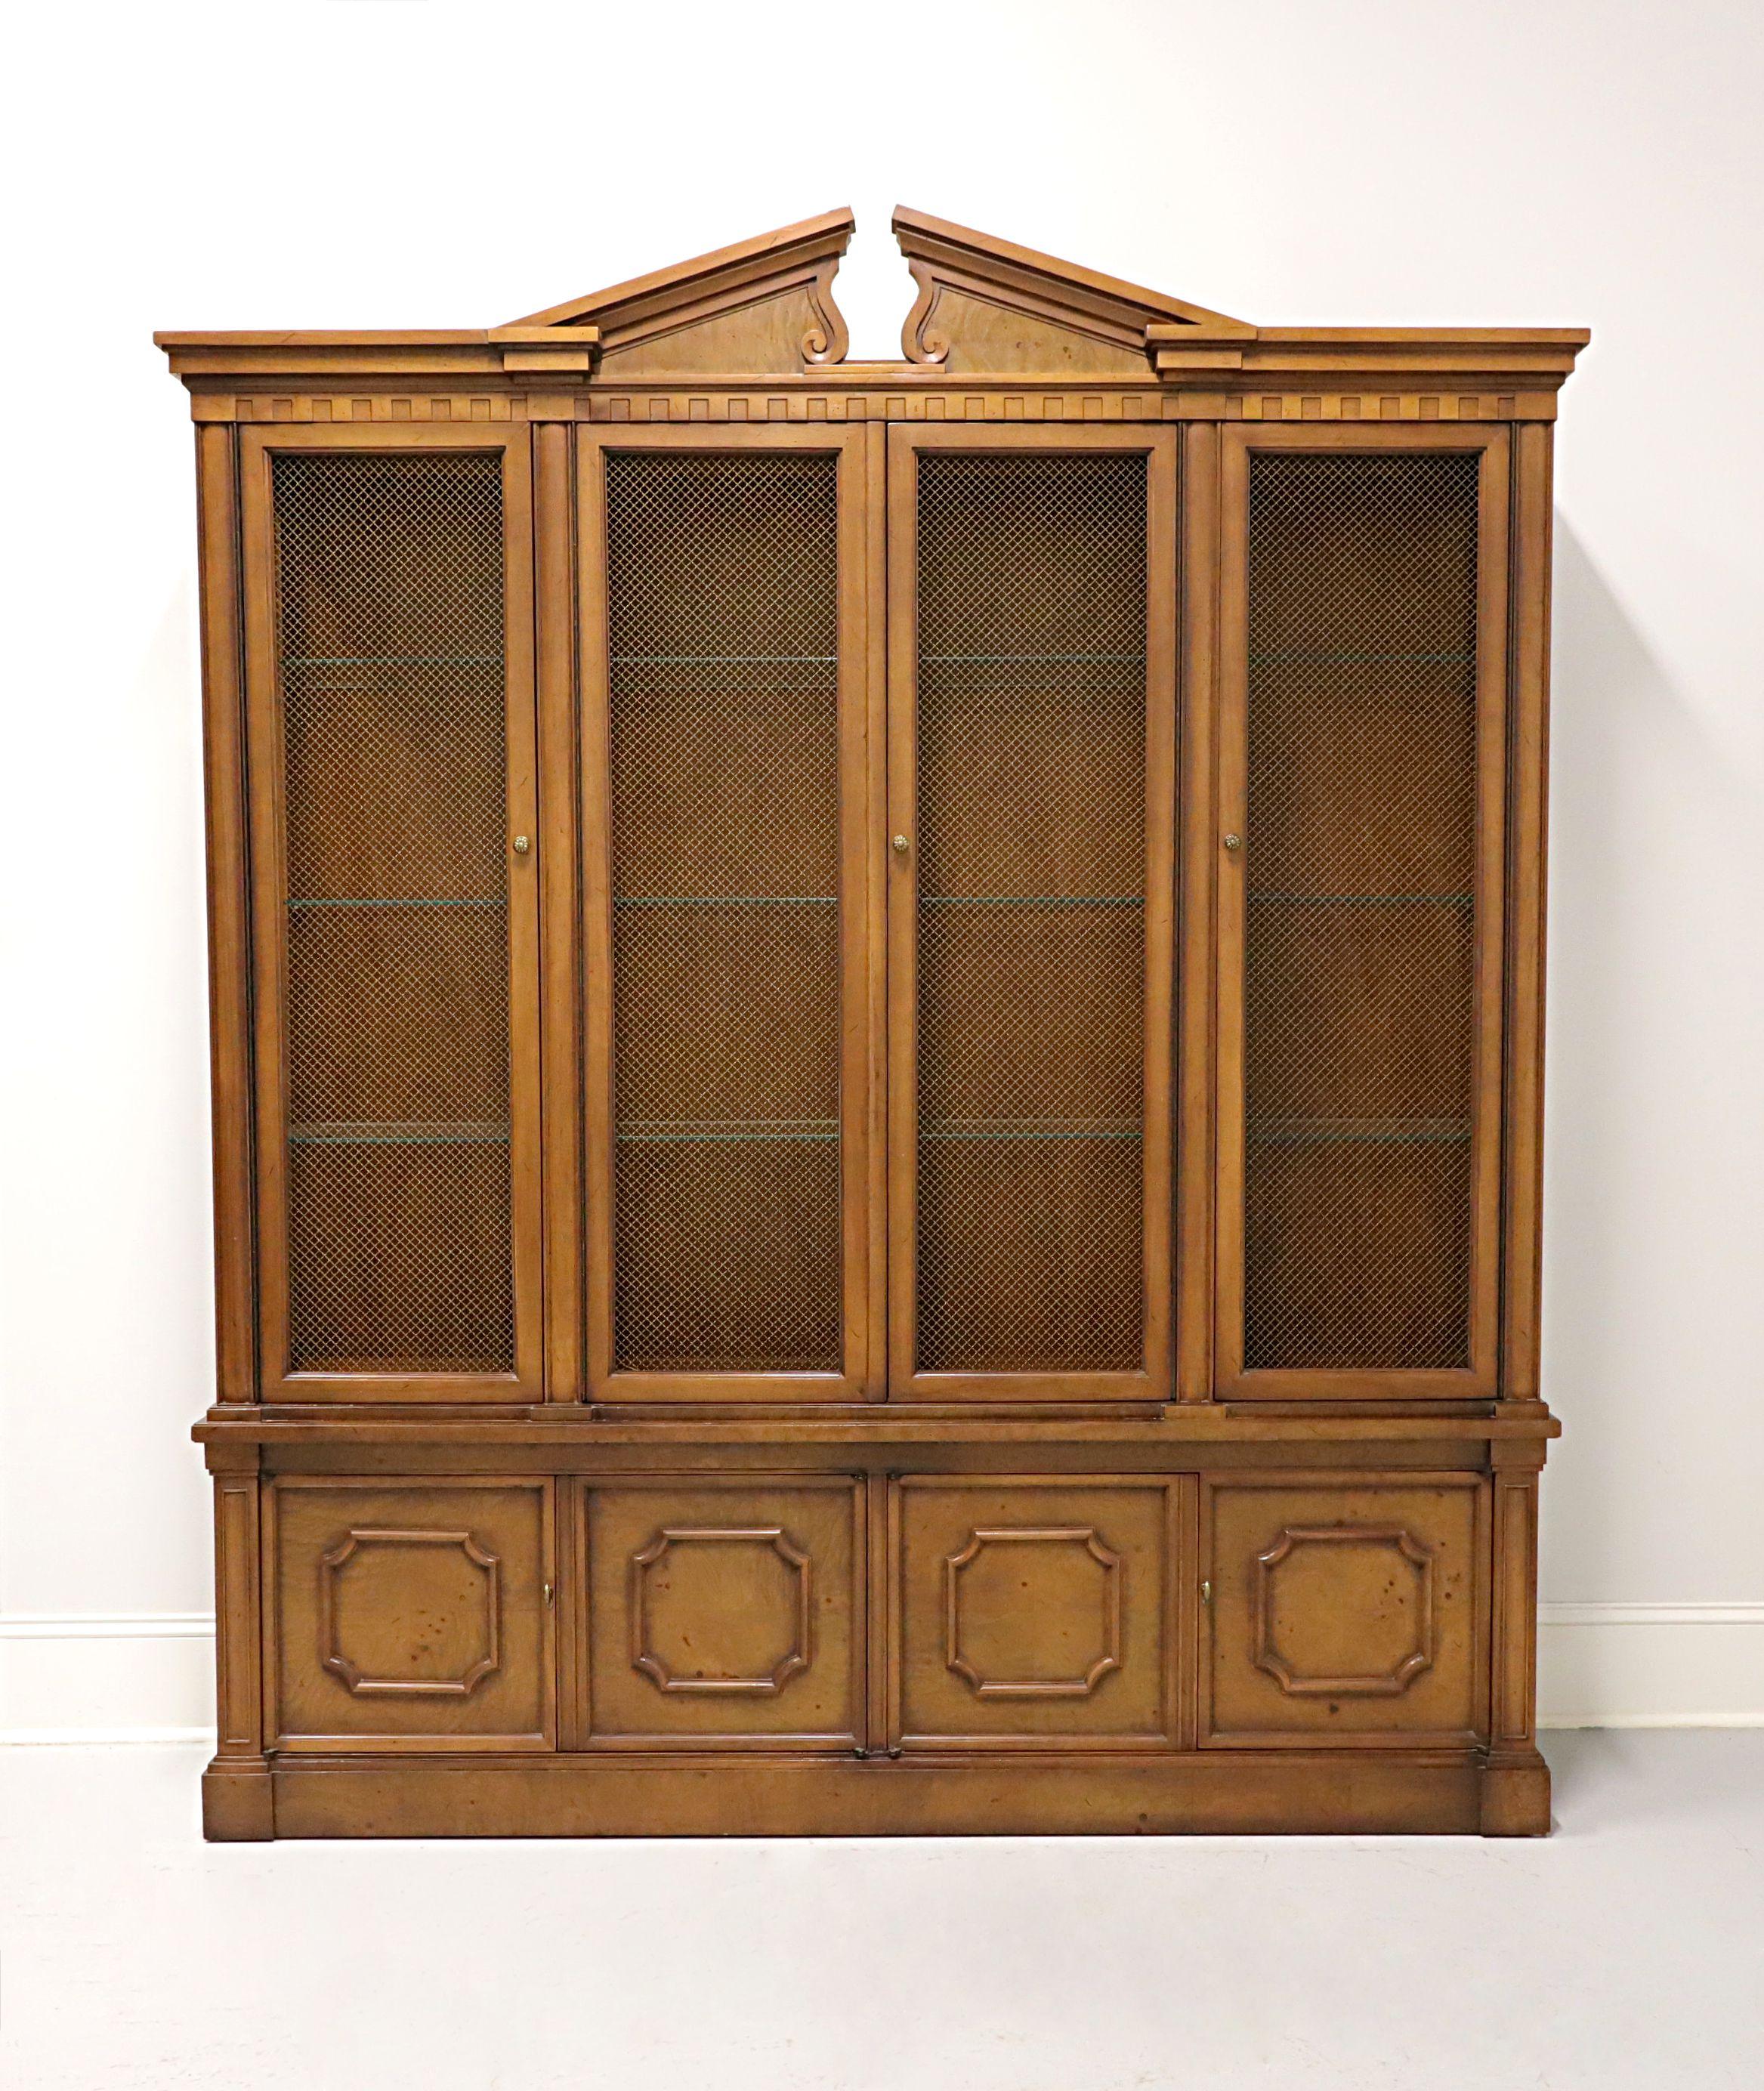 TOMLINSON 1960's Neoclassical China Cabinet 6